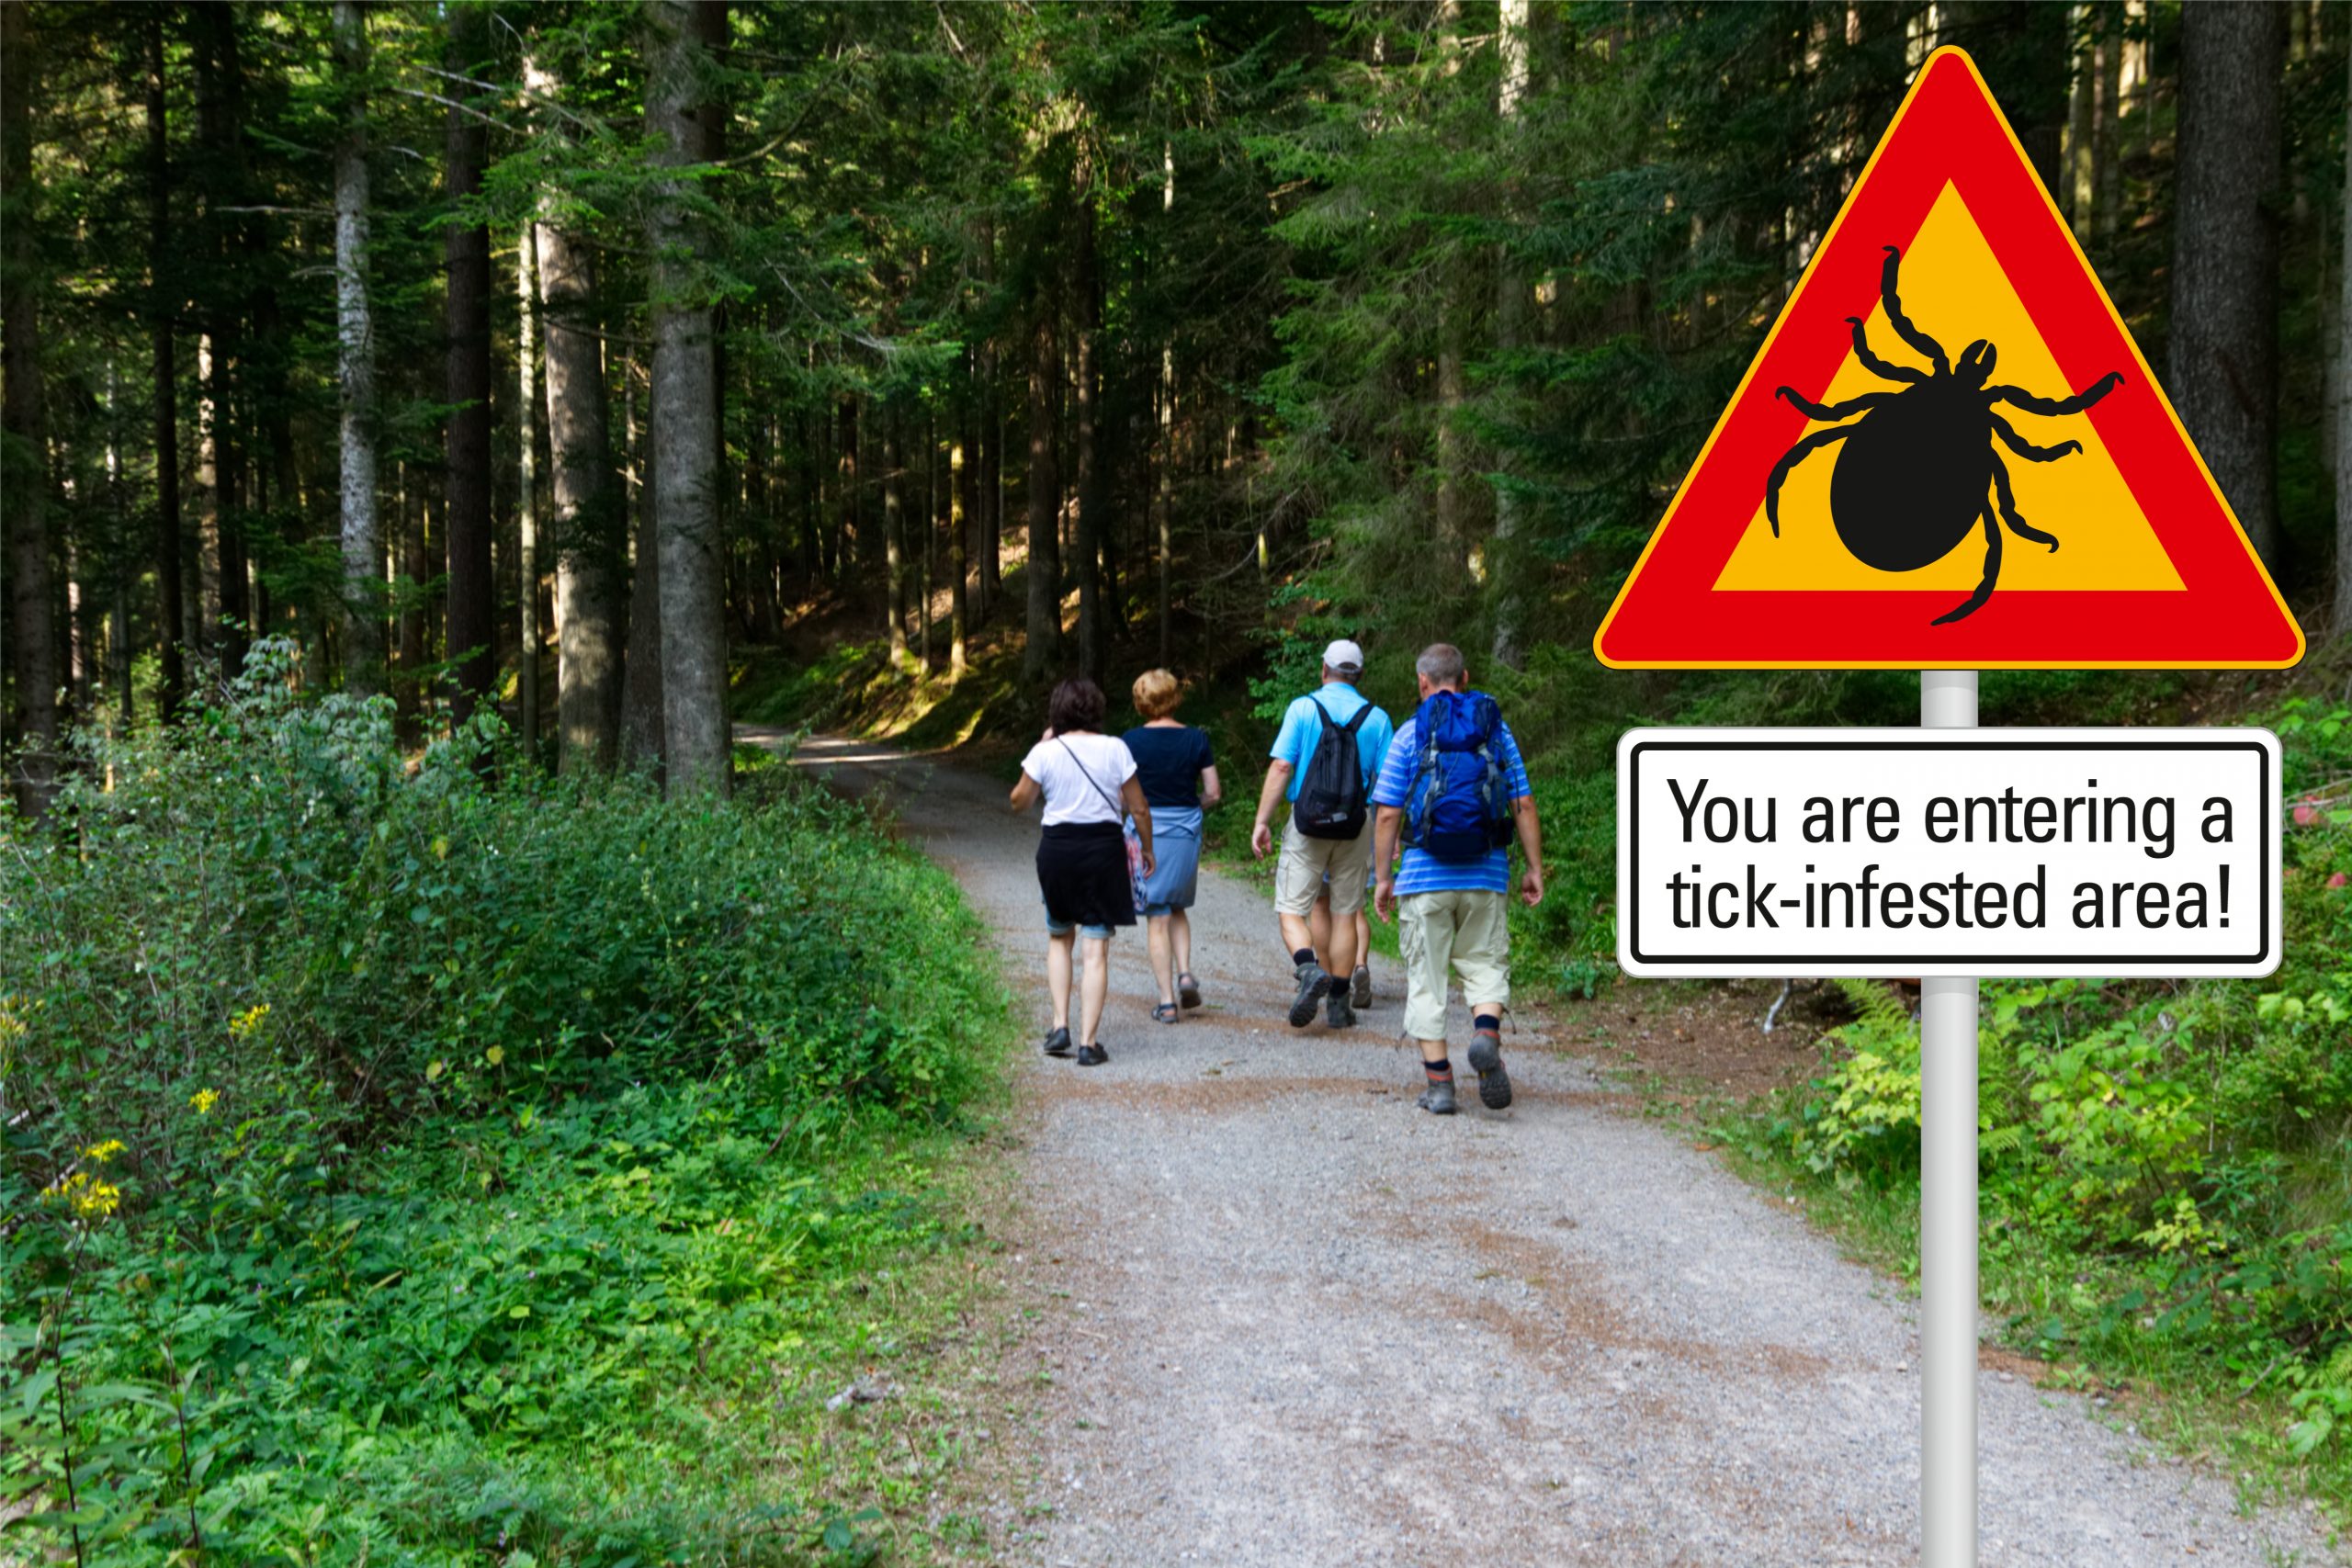 Tick bite prevention warning sign- hikers walking through the forest